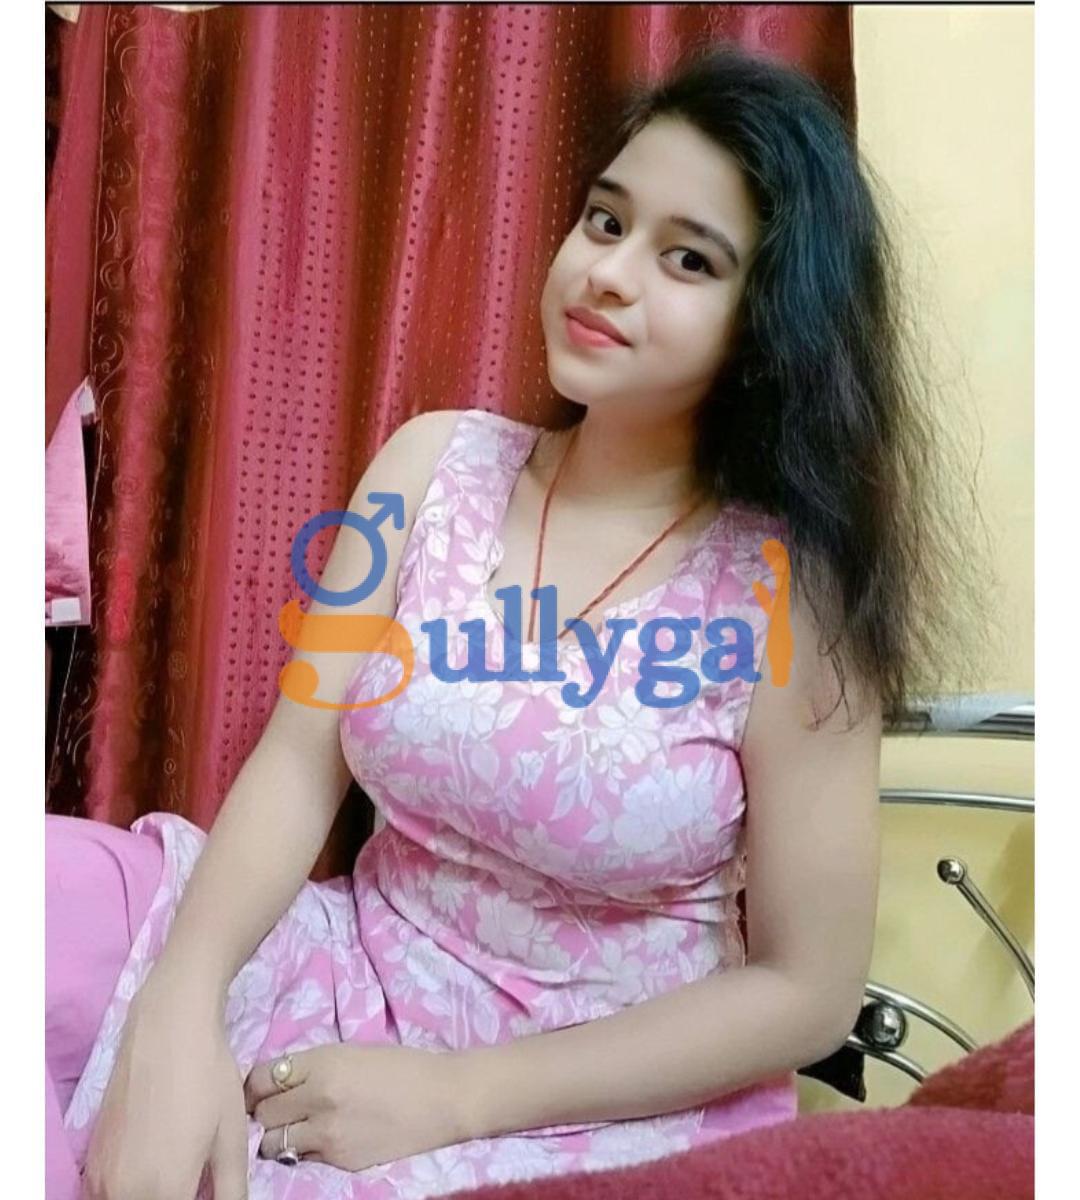 BEST KAJOL 8144955248❤️LOW PRICE ❤️ GENUINE CALL GIRL CASH ❤️AVAILABLE ❤️100% TRUSTED❤️UNLIMITED ❤️ SHO